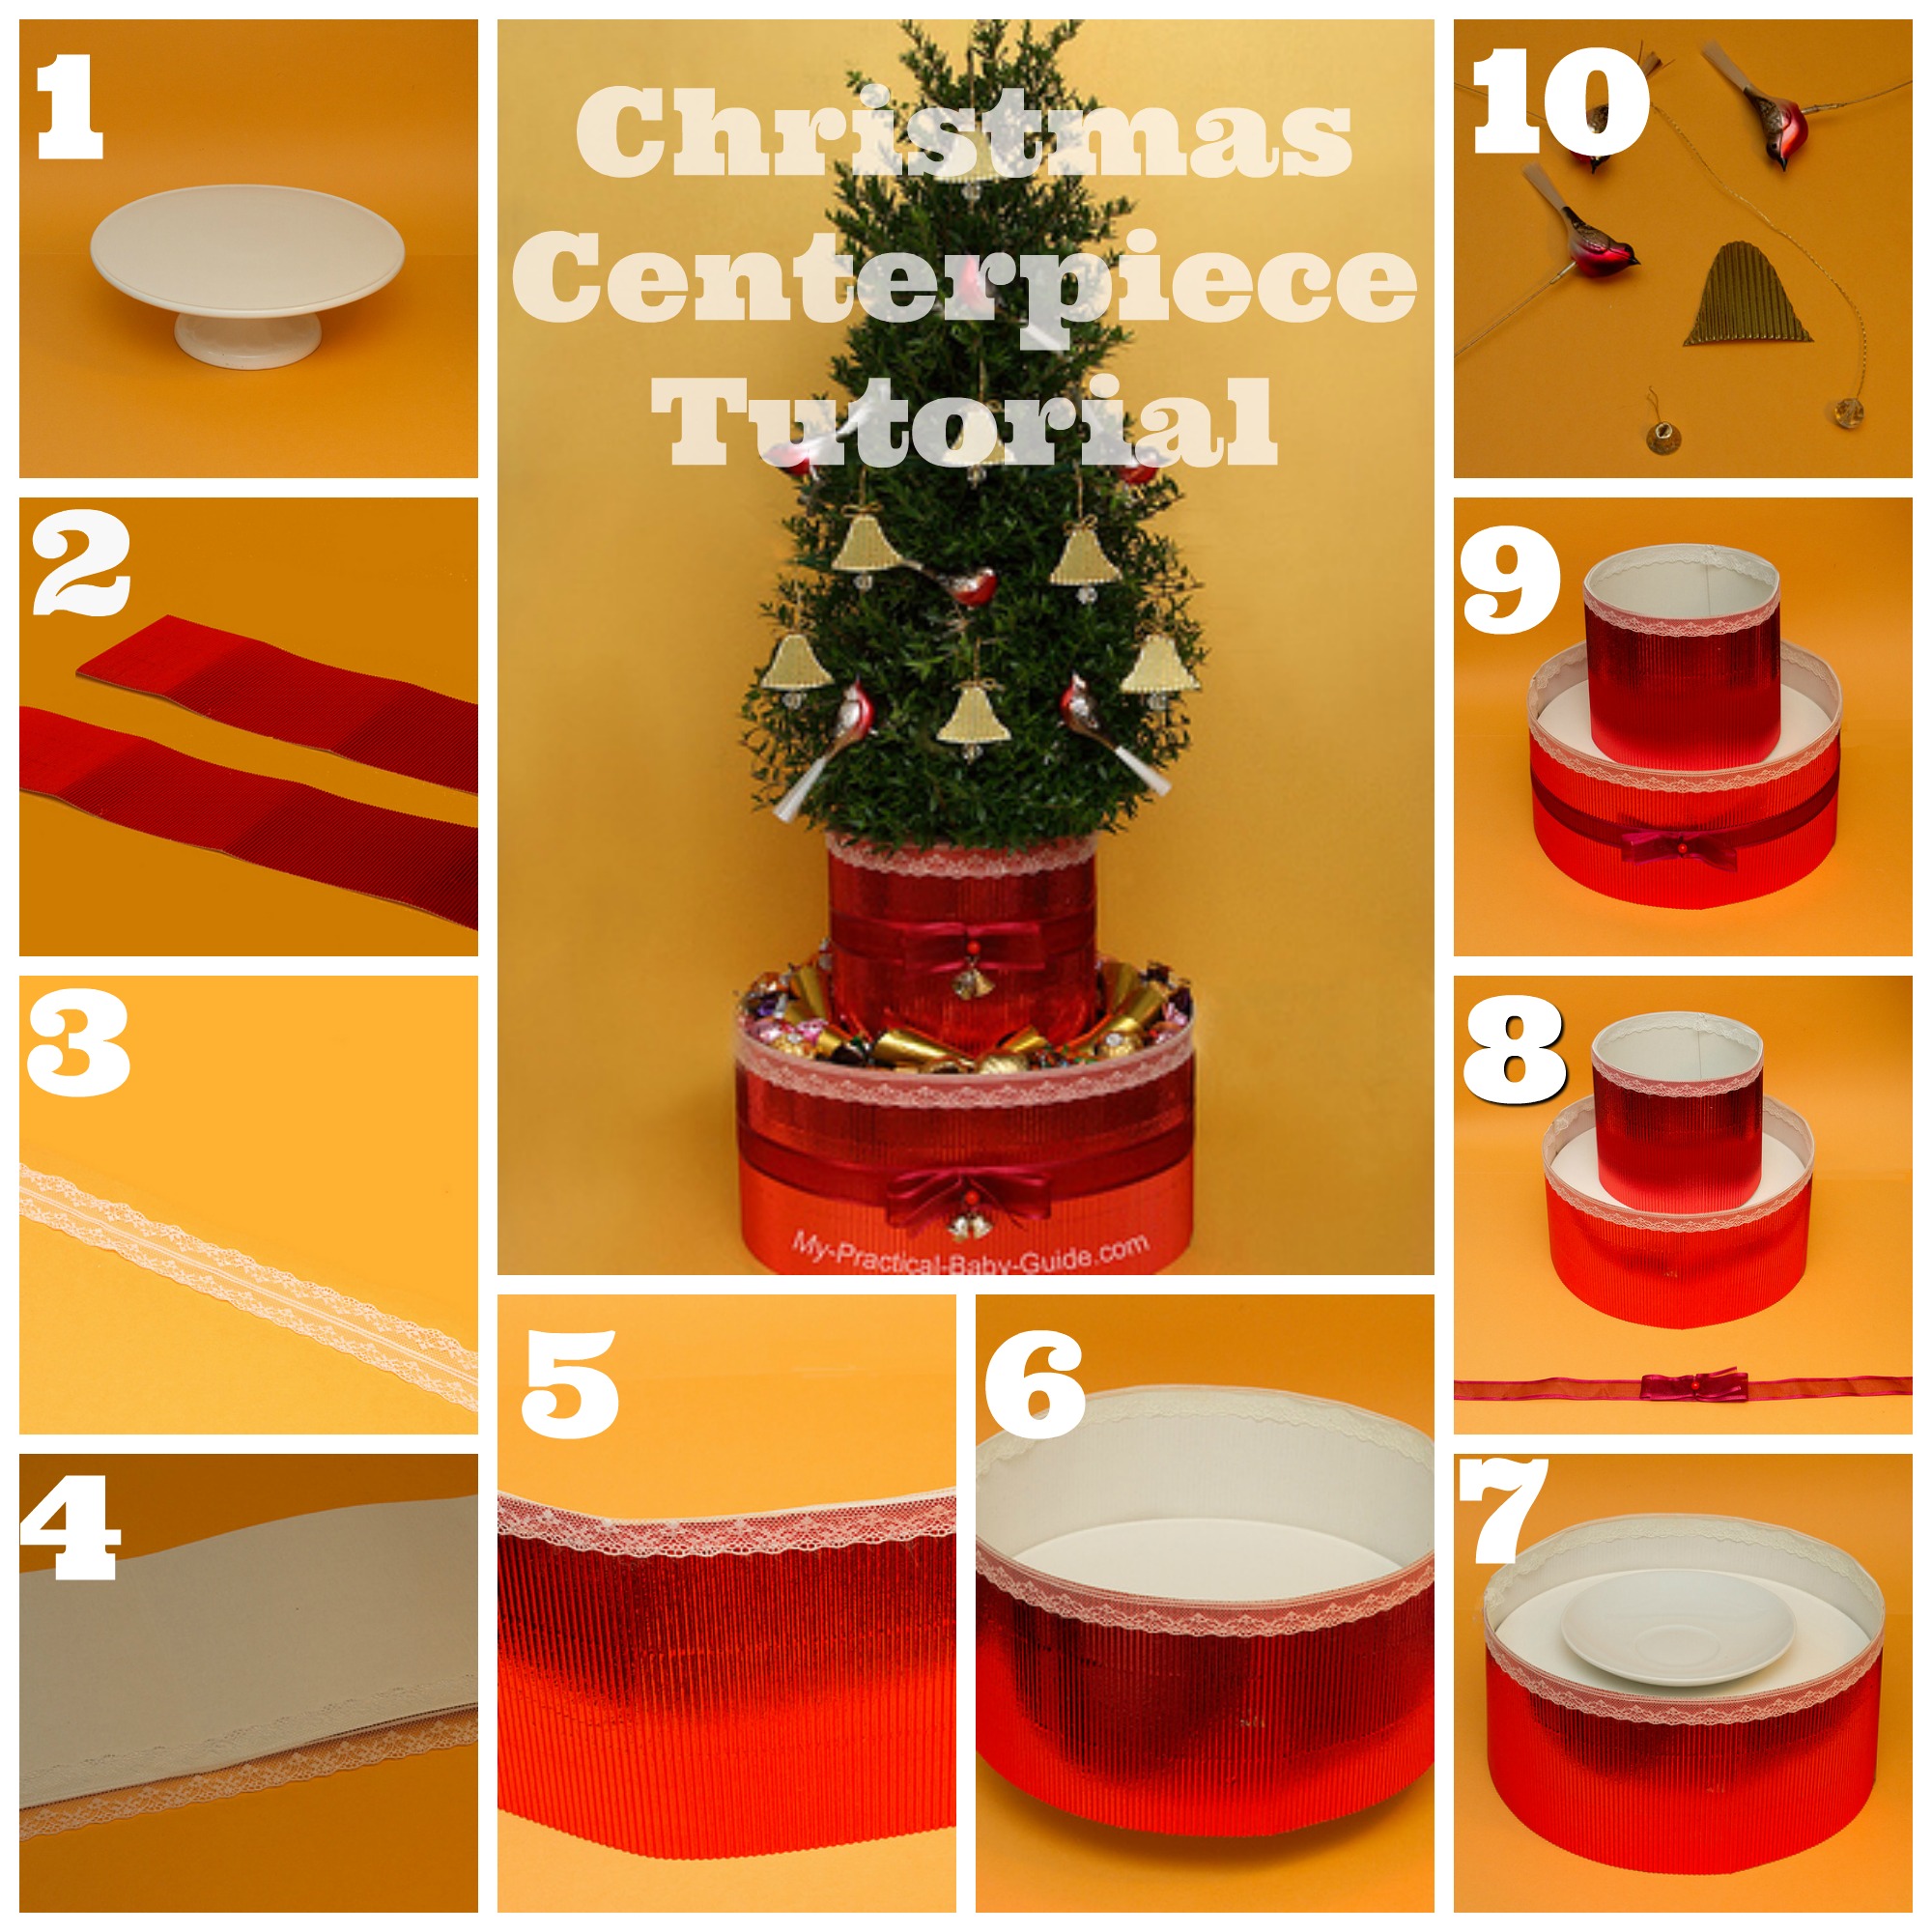 How To Make A Christmas Centerpiece My Practical Baby Shower Guide